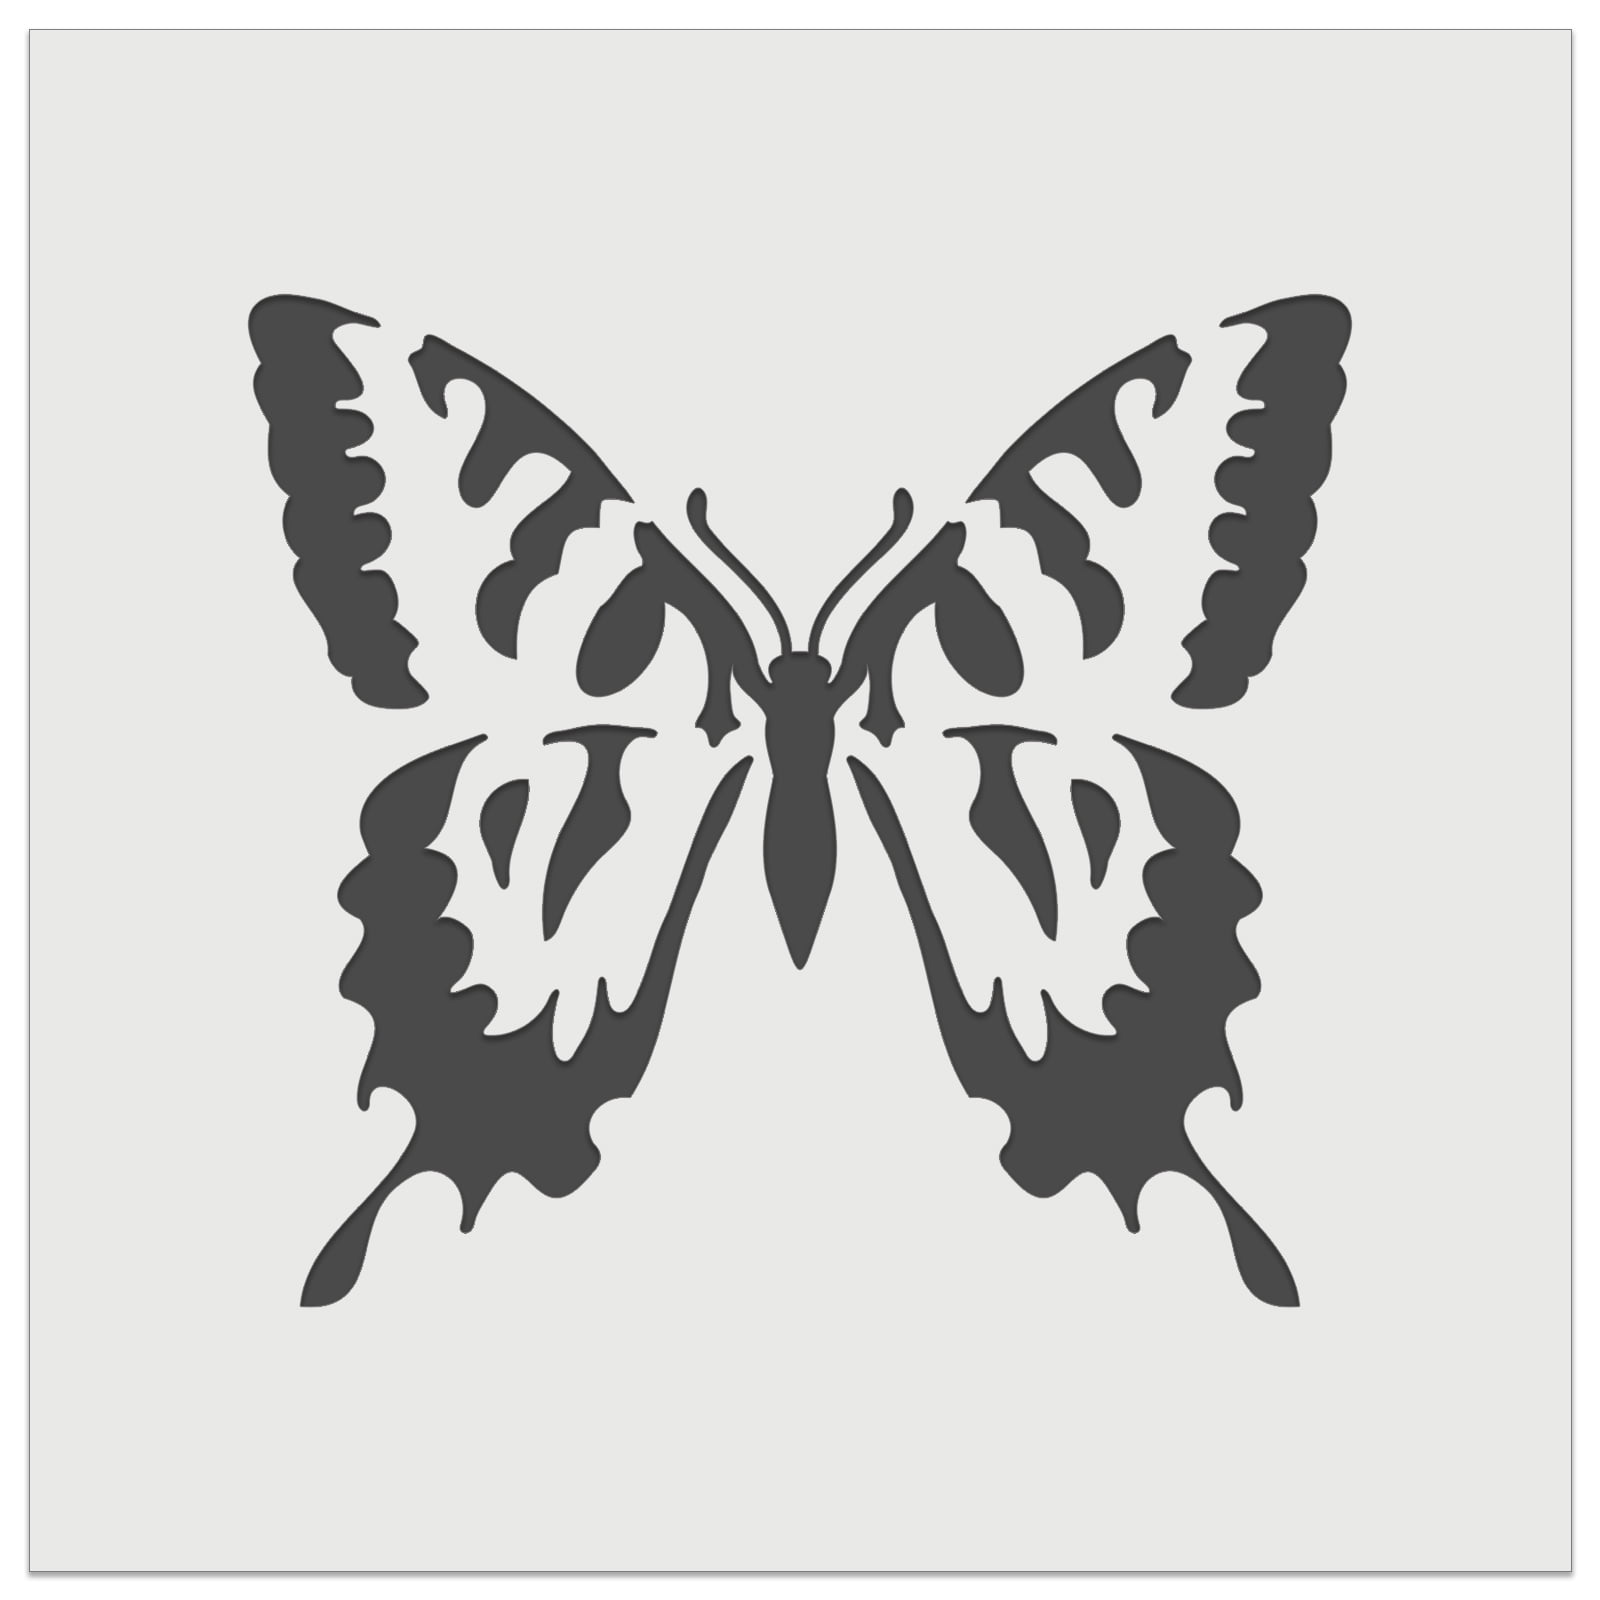 Small Butterflies Free US Shipping 6"x6" Endless Inspirations Stencil 